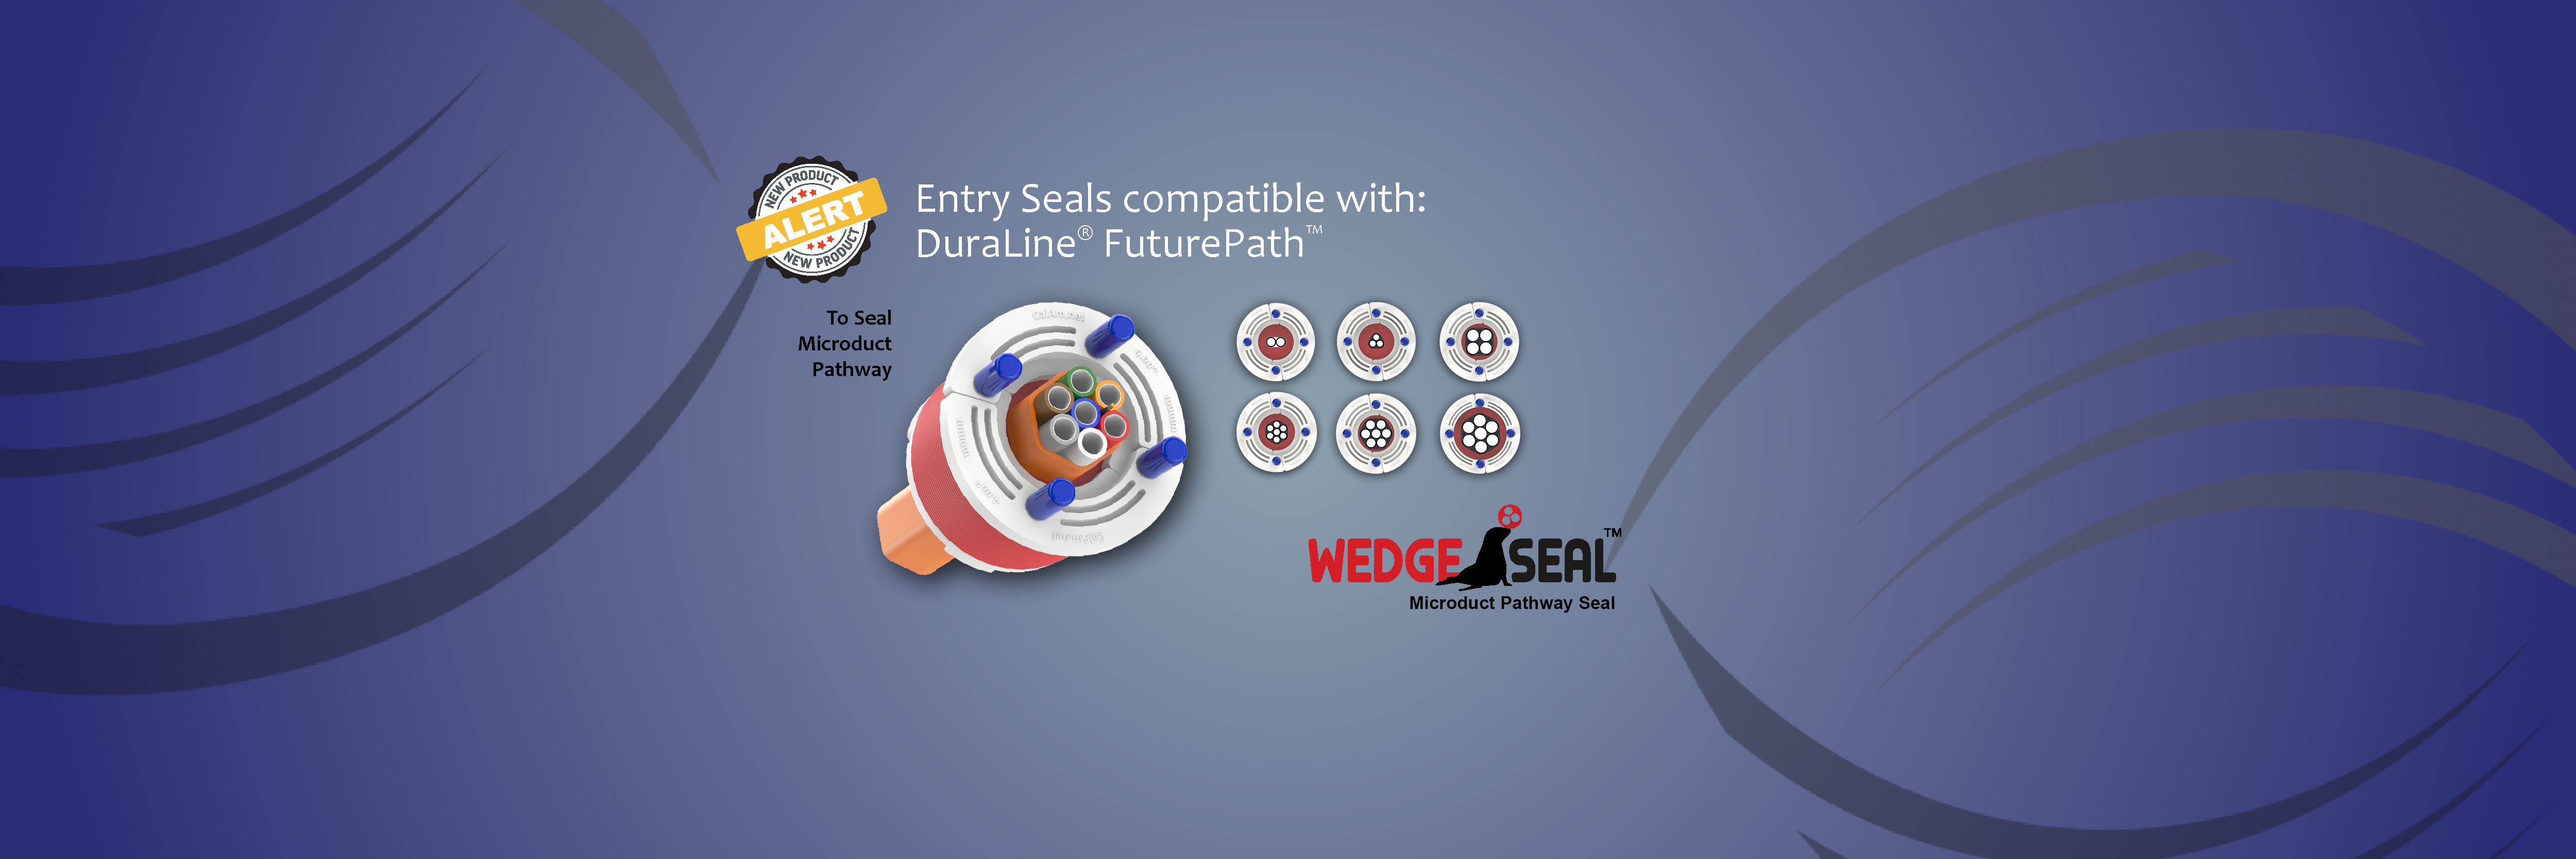 New product Wedge Seal 4 inch Entry Seal Duct Plugs specifically for Microduct Pathway homepage banner